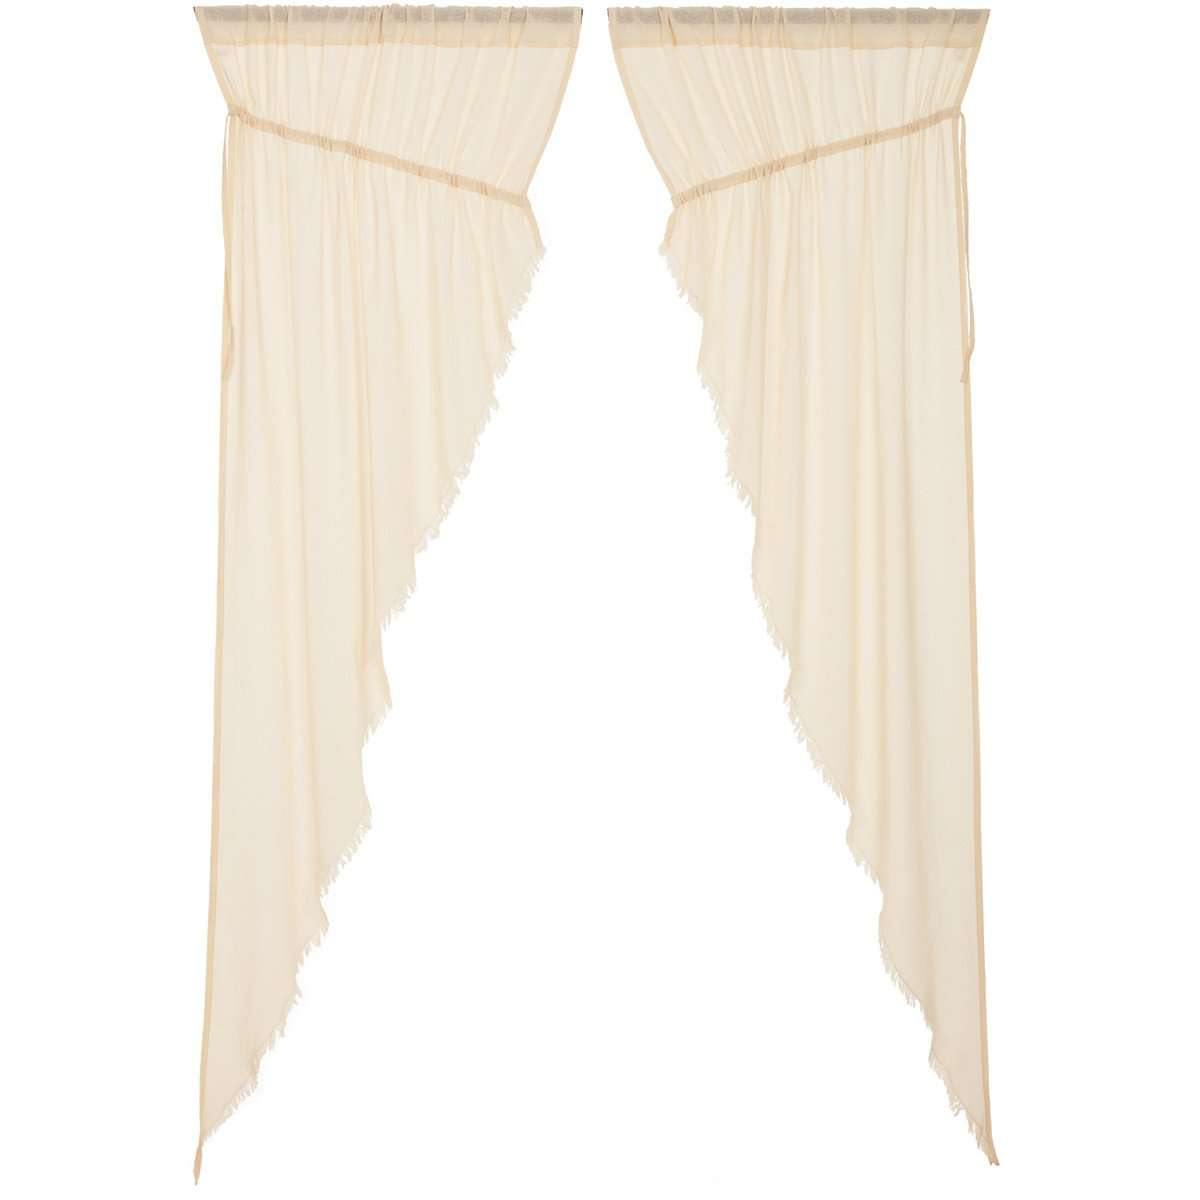 Tobacco Cloth Natural Prairie Long Panel Curtain Fringed Set of 2 84x36x18 VHC Brands - The Fox Decor